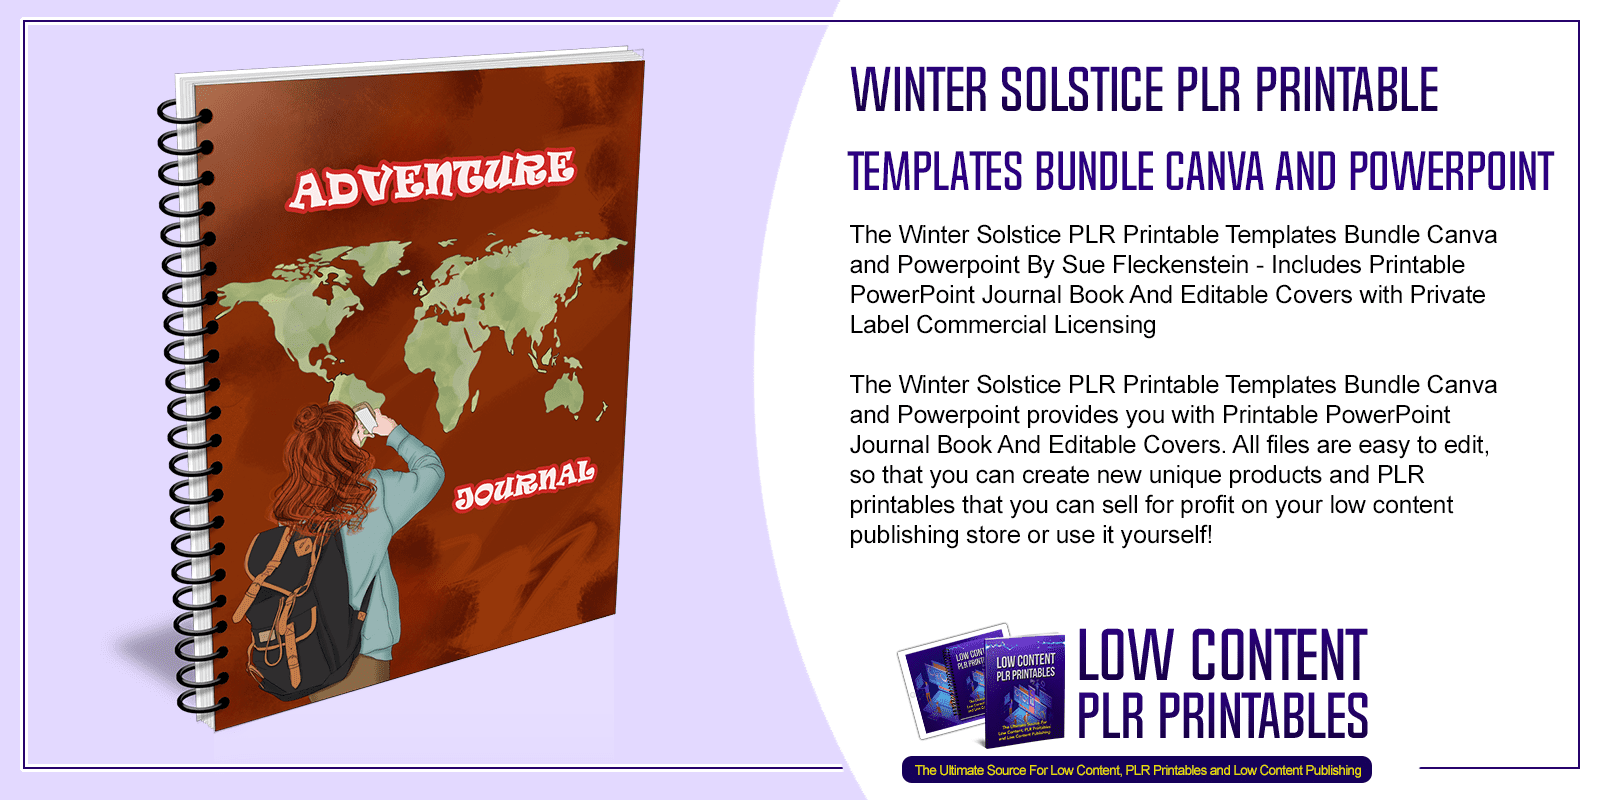 Winter Solstice PLR Printable Templates Bundle Canva and Powerpoint